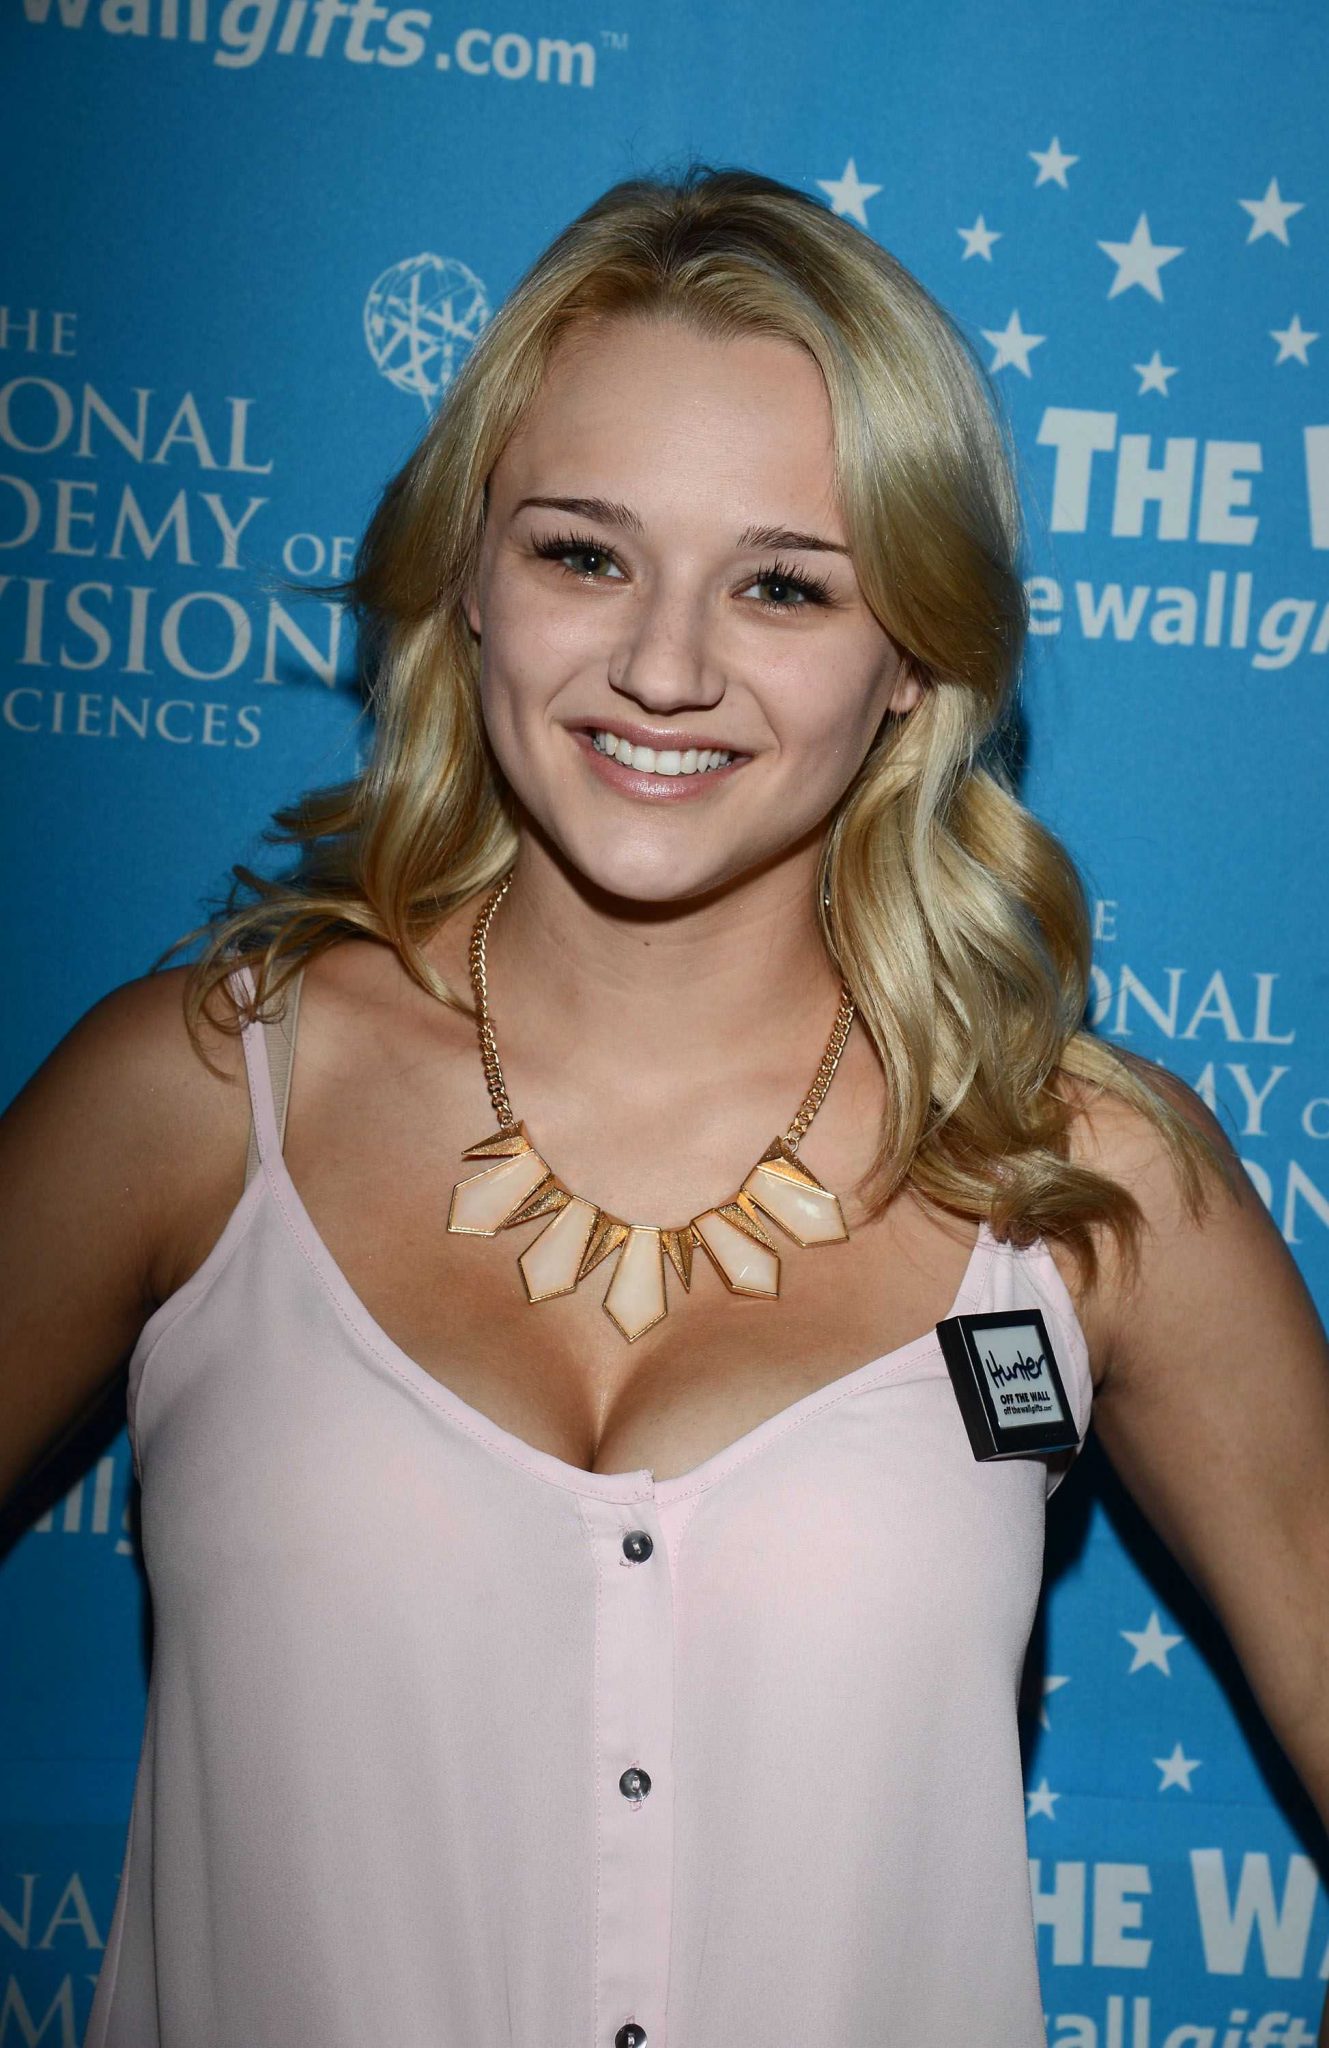 51 Hunter King Nude Pictures Display Her As A Skilled Performer 110